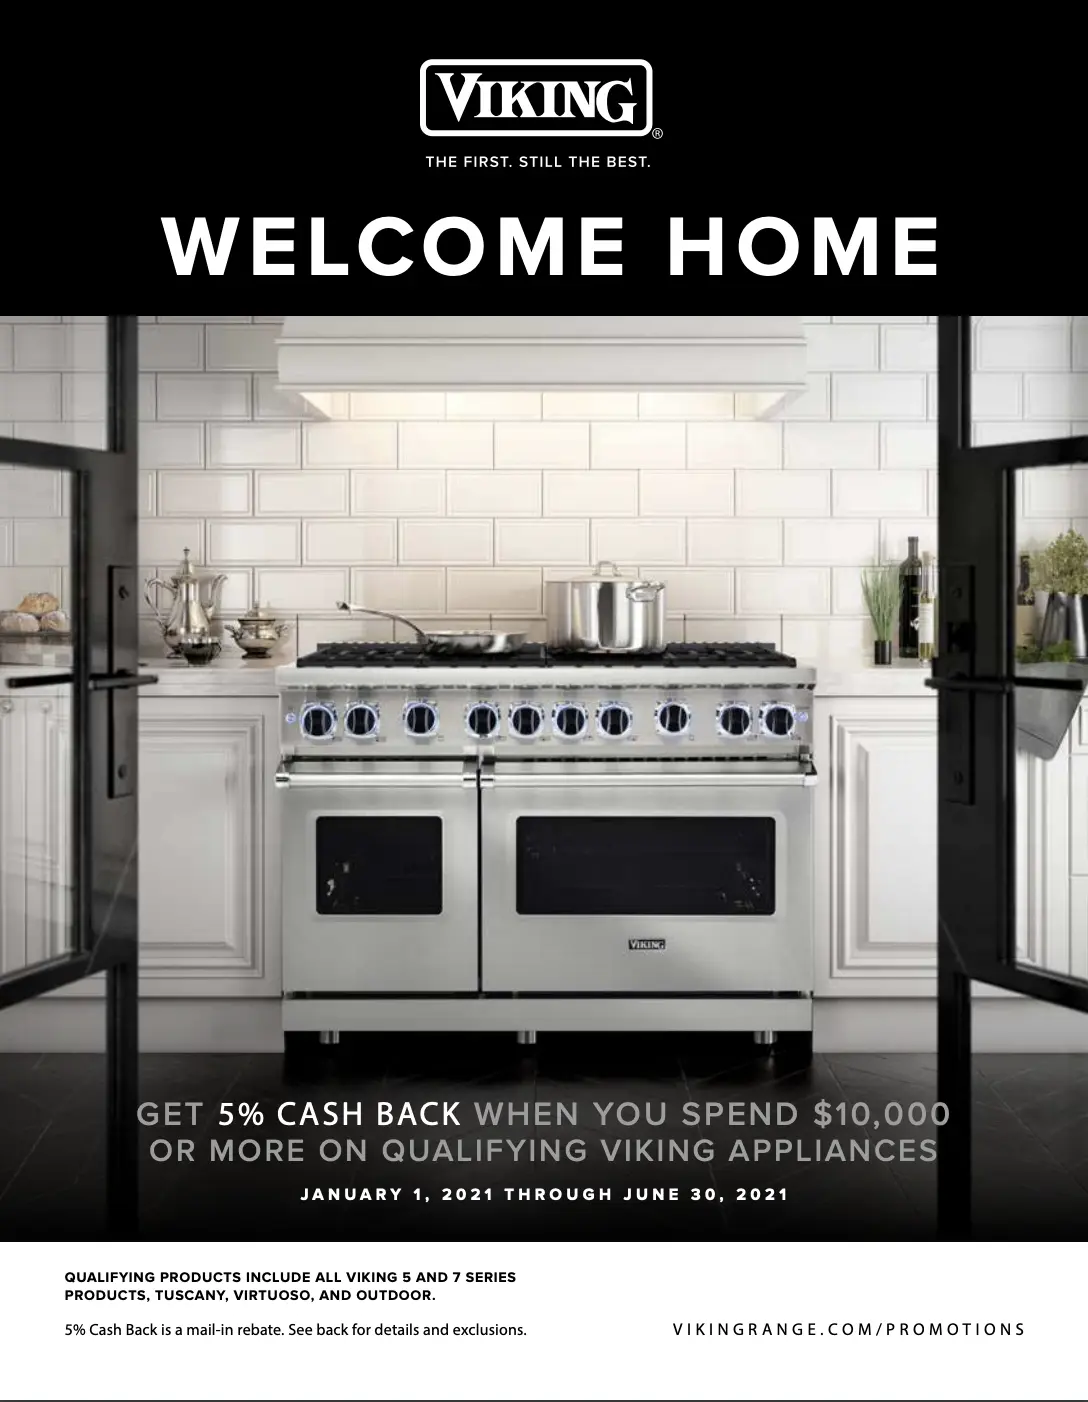 Welcome Home to Viking appliances, offered at Capital Distributing